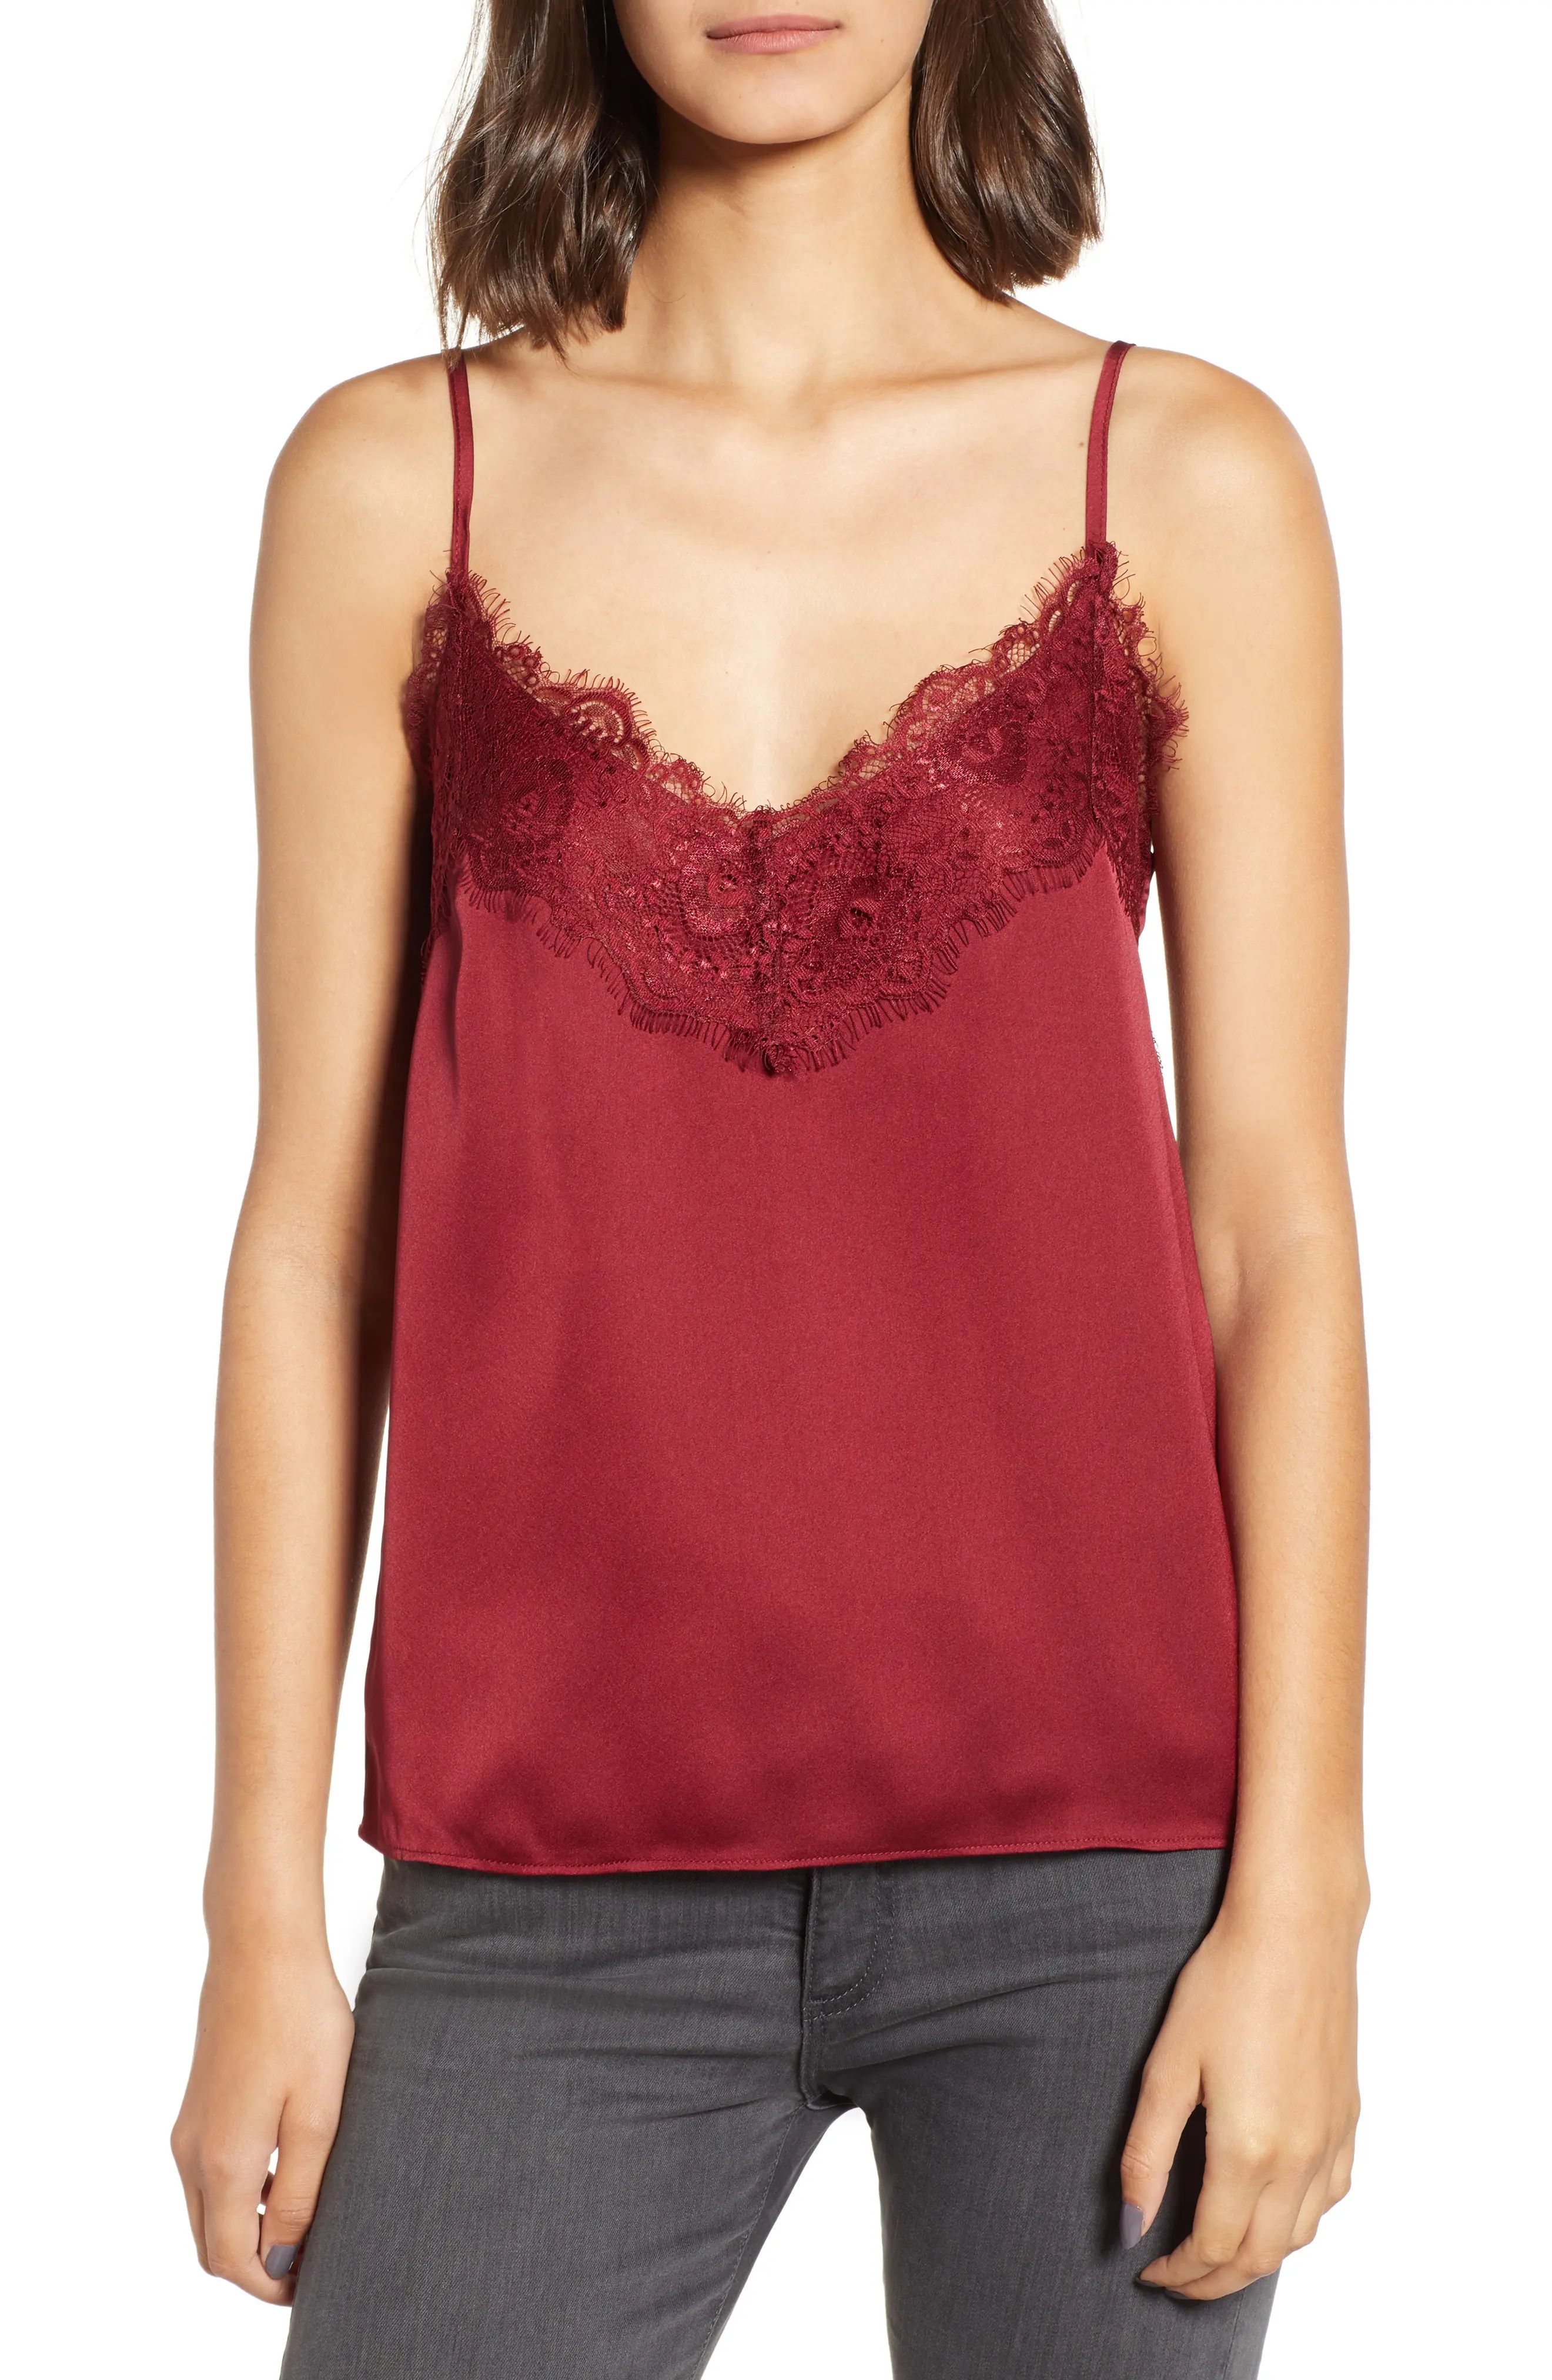 Heartloom Andra Satin Lace Trim Camisole | Nordstrom